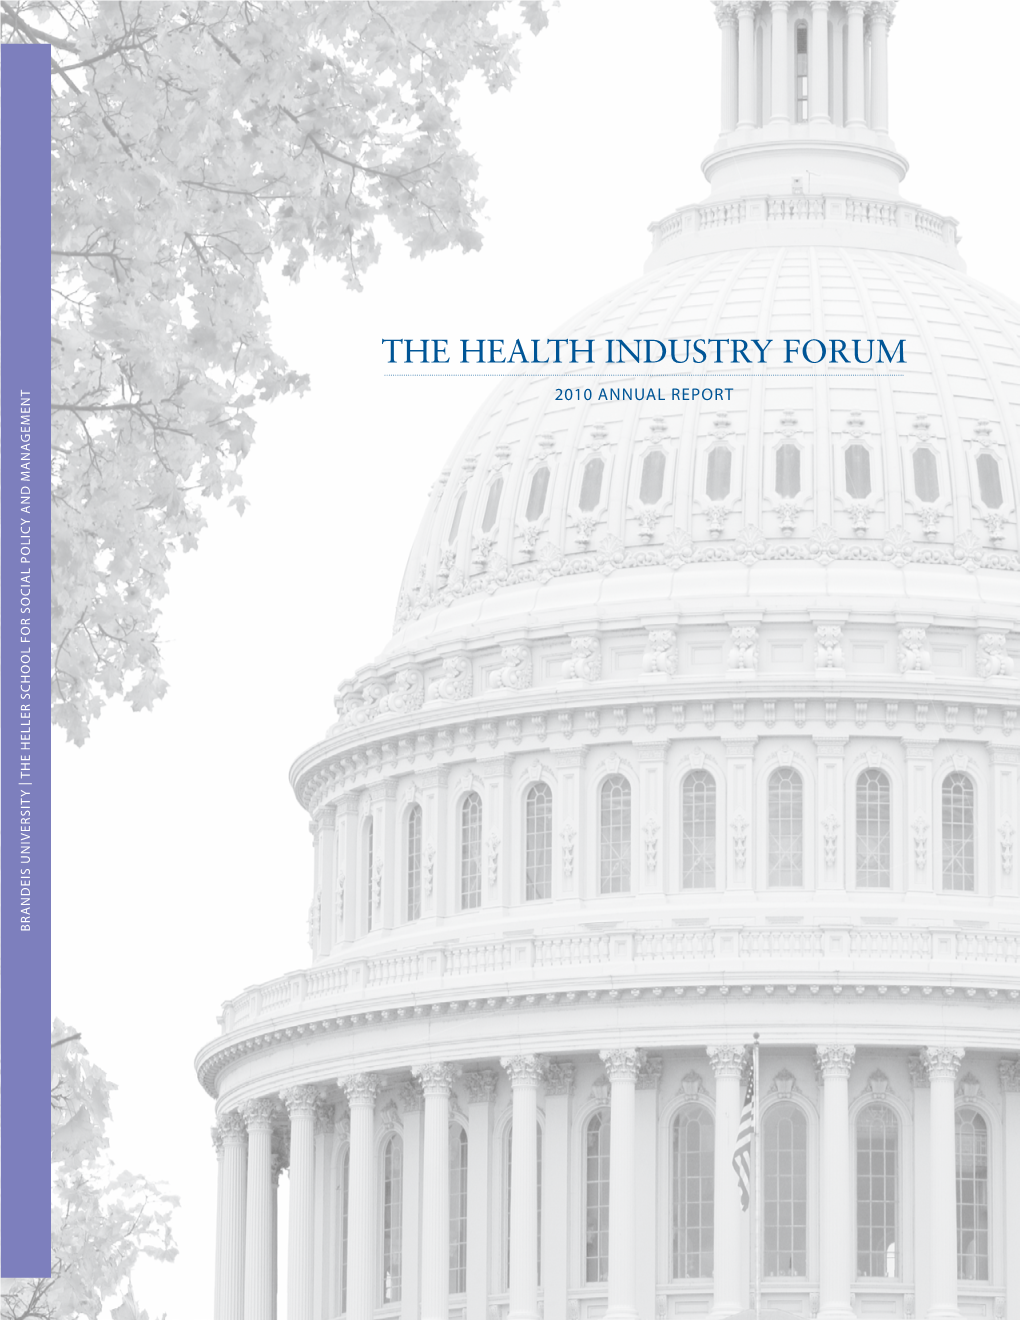 The Health Industry Forum